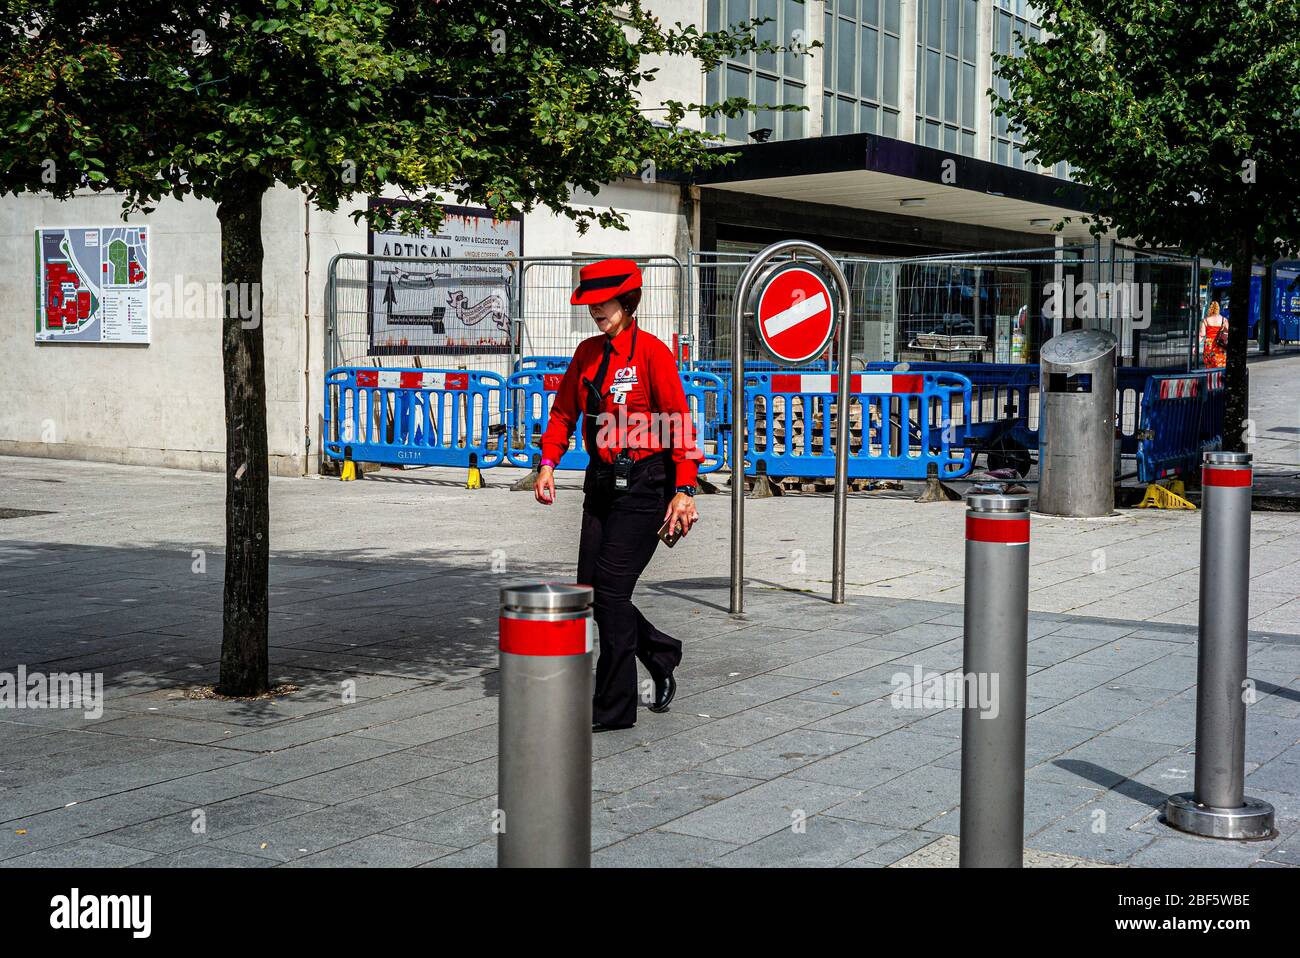 A woman in a red uniform walks down the street past traffic control bollards Stock Photo